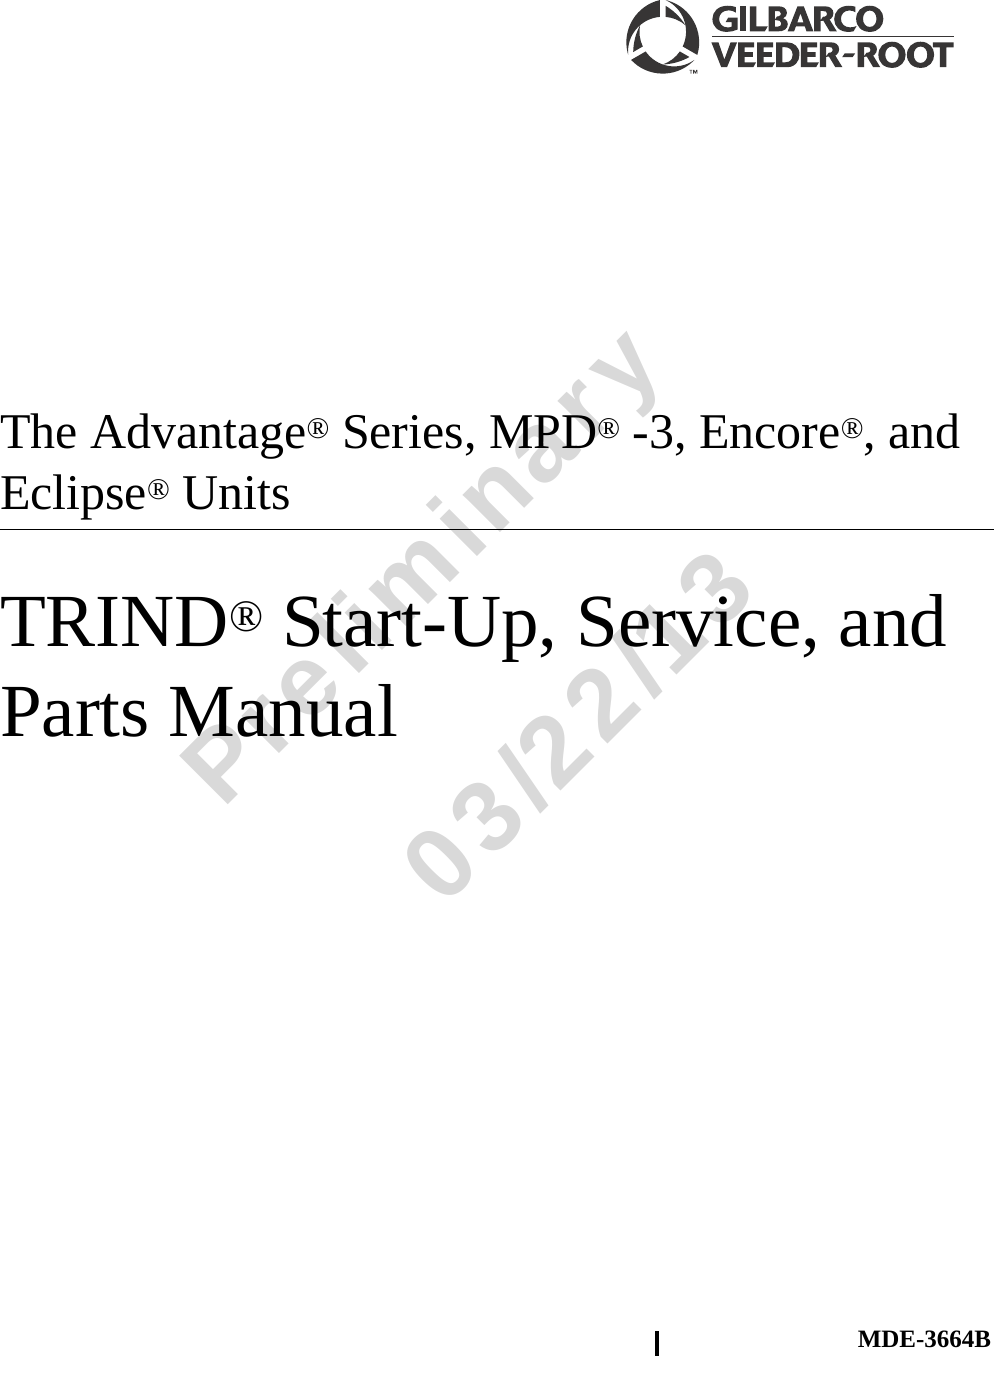 Preliminary03/22/13The Advantage® Series, MPD® -3, Encore®, and Eclipse® Units TRIND® Start-Up, Service, and Parts ManualMDE-3664B